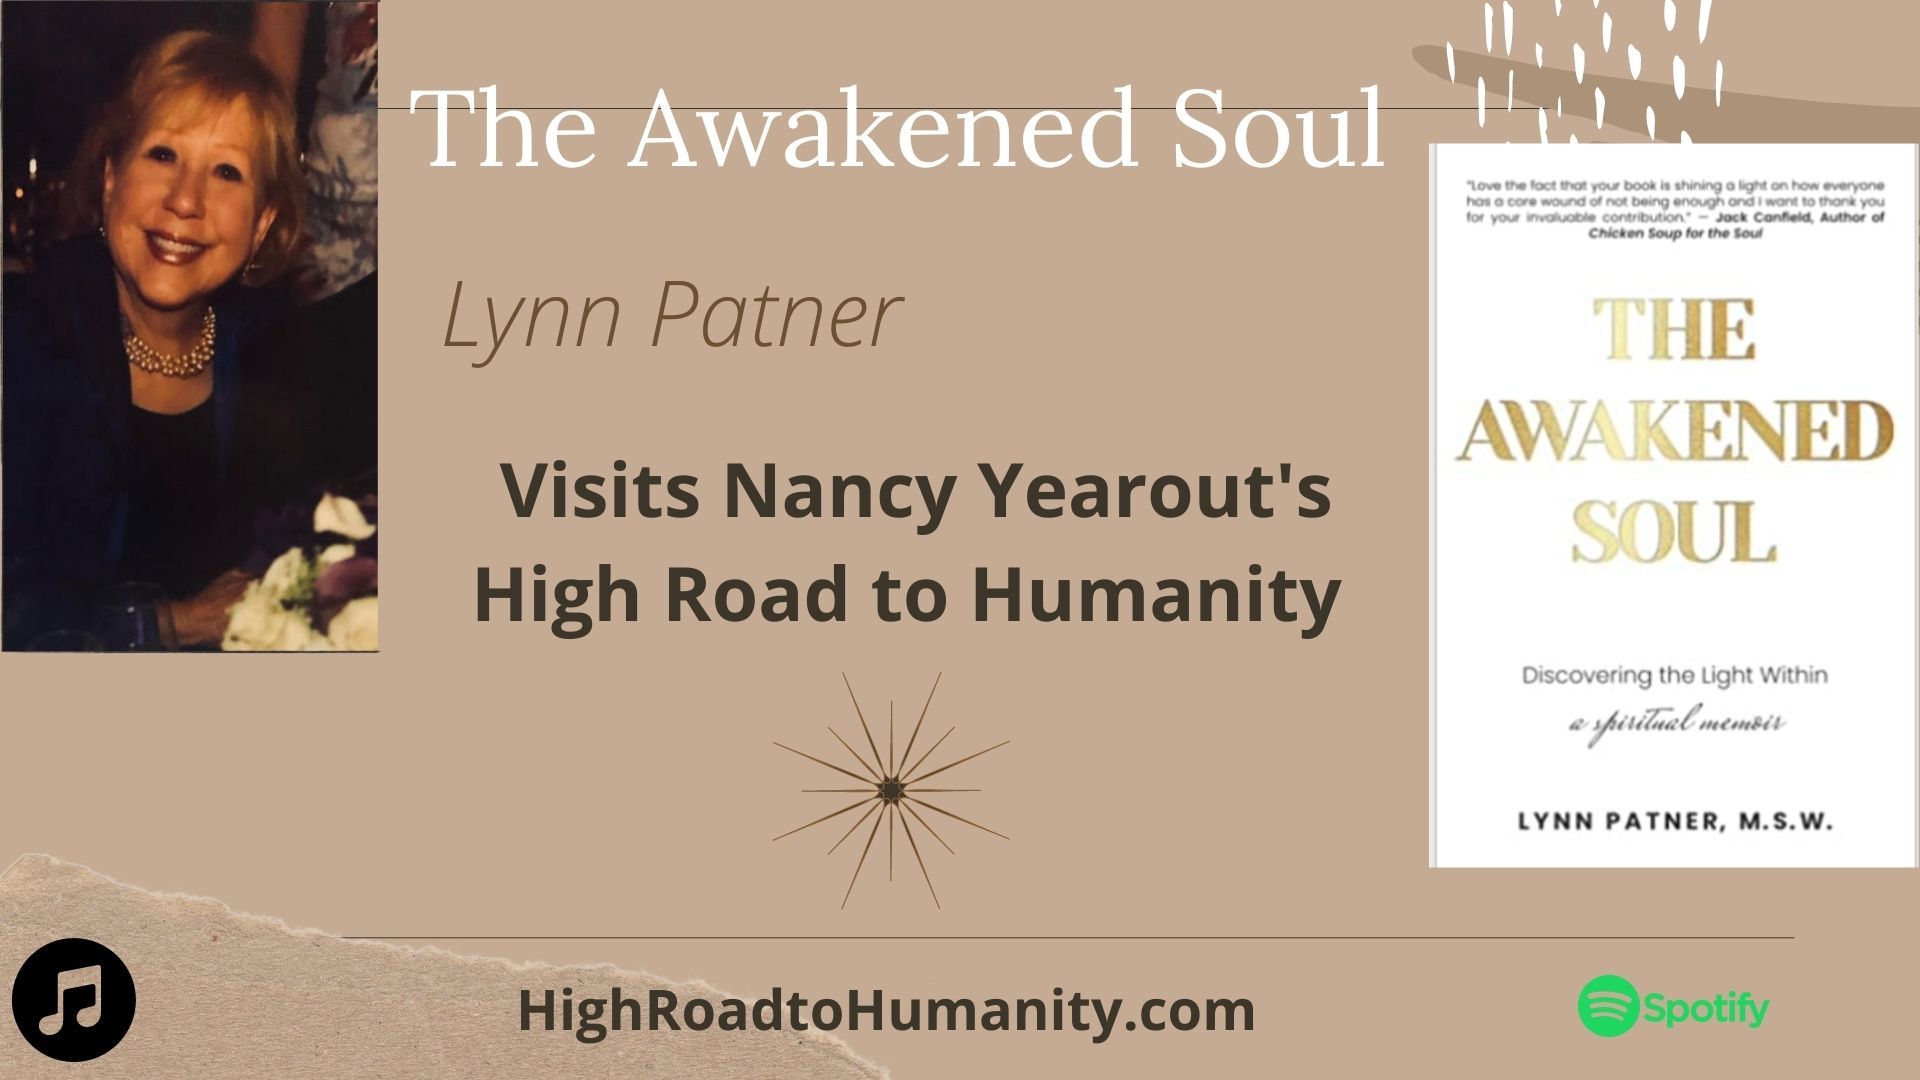 The Awakened Soul with Lynn Patner on Nancy Yearout's High Road to Humanity